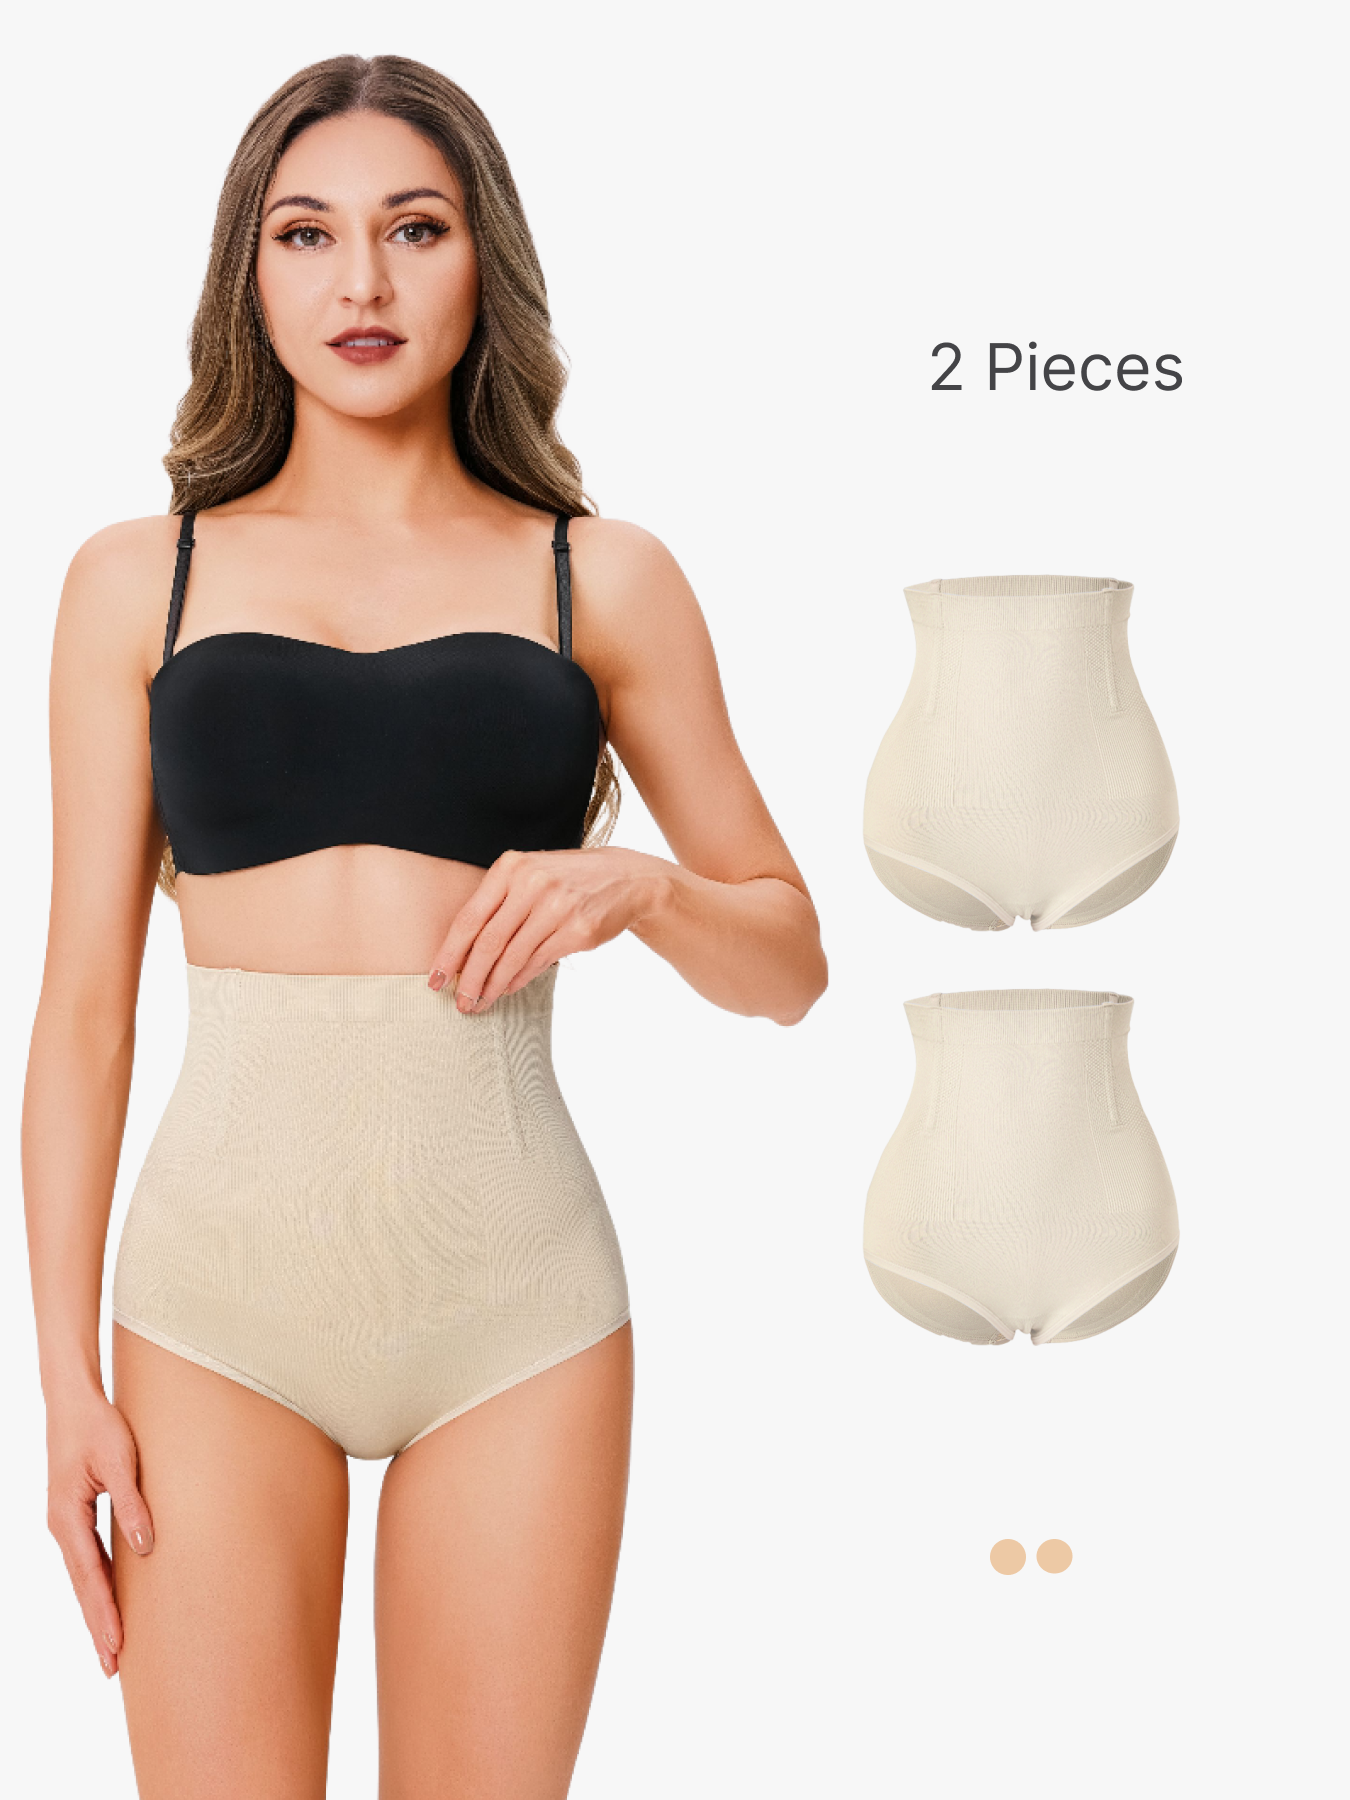 BRABIC 2 Piece Control Panties for Women High Waisted Slimming Shapewear Body Shaper CP004